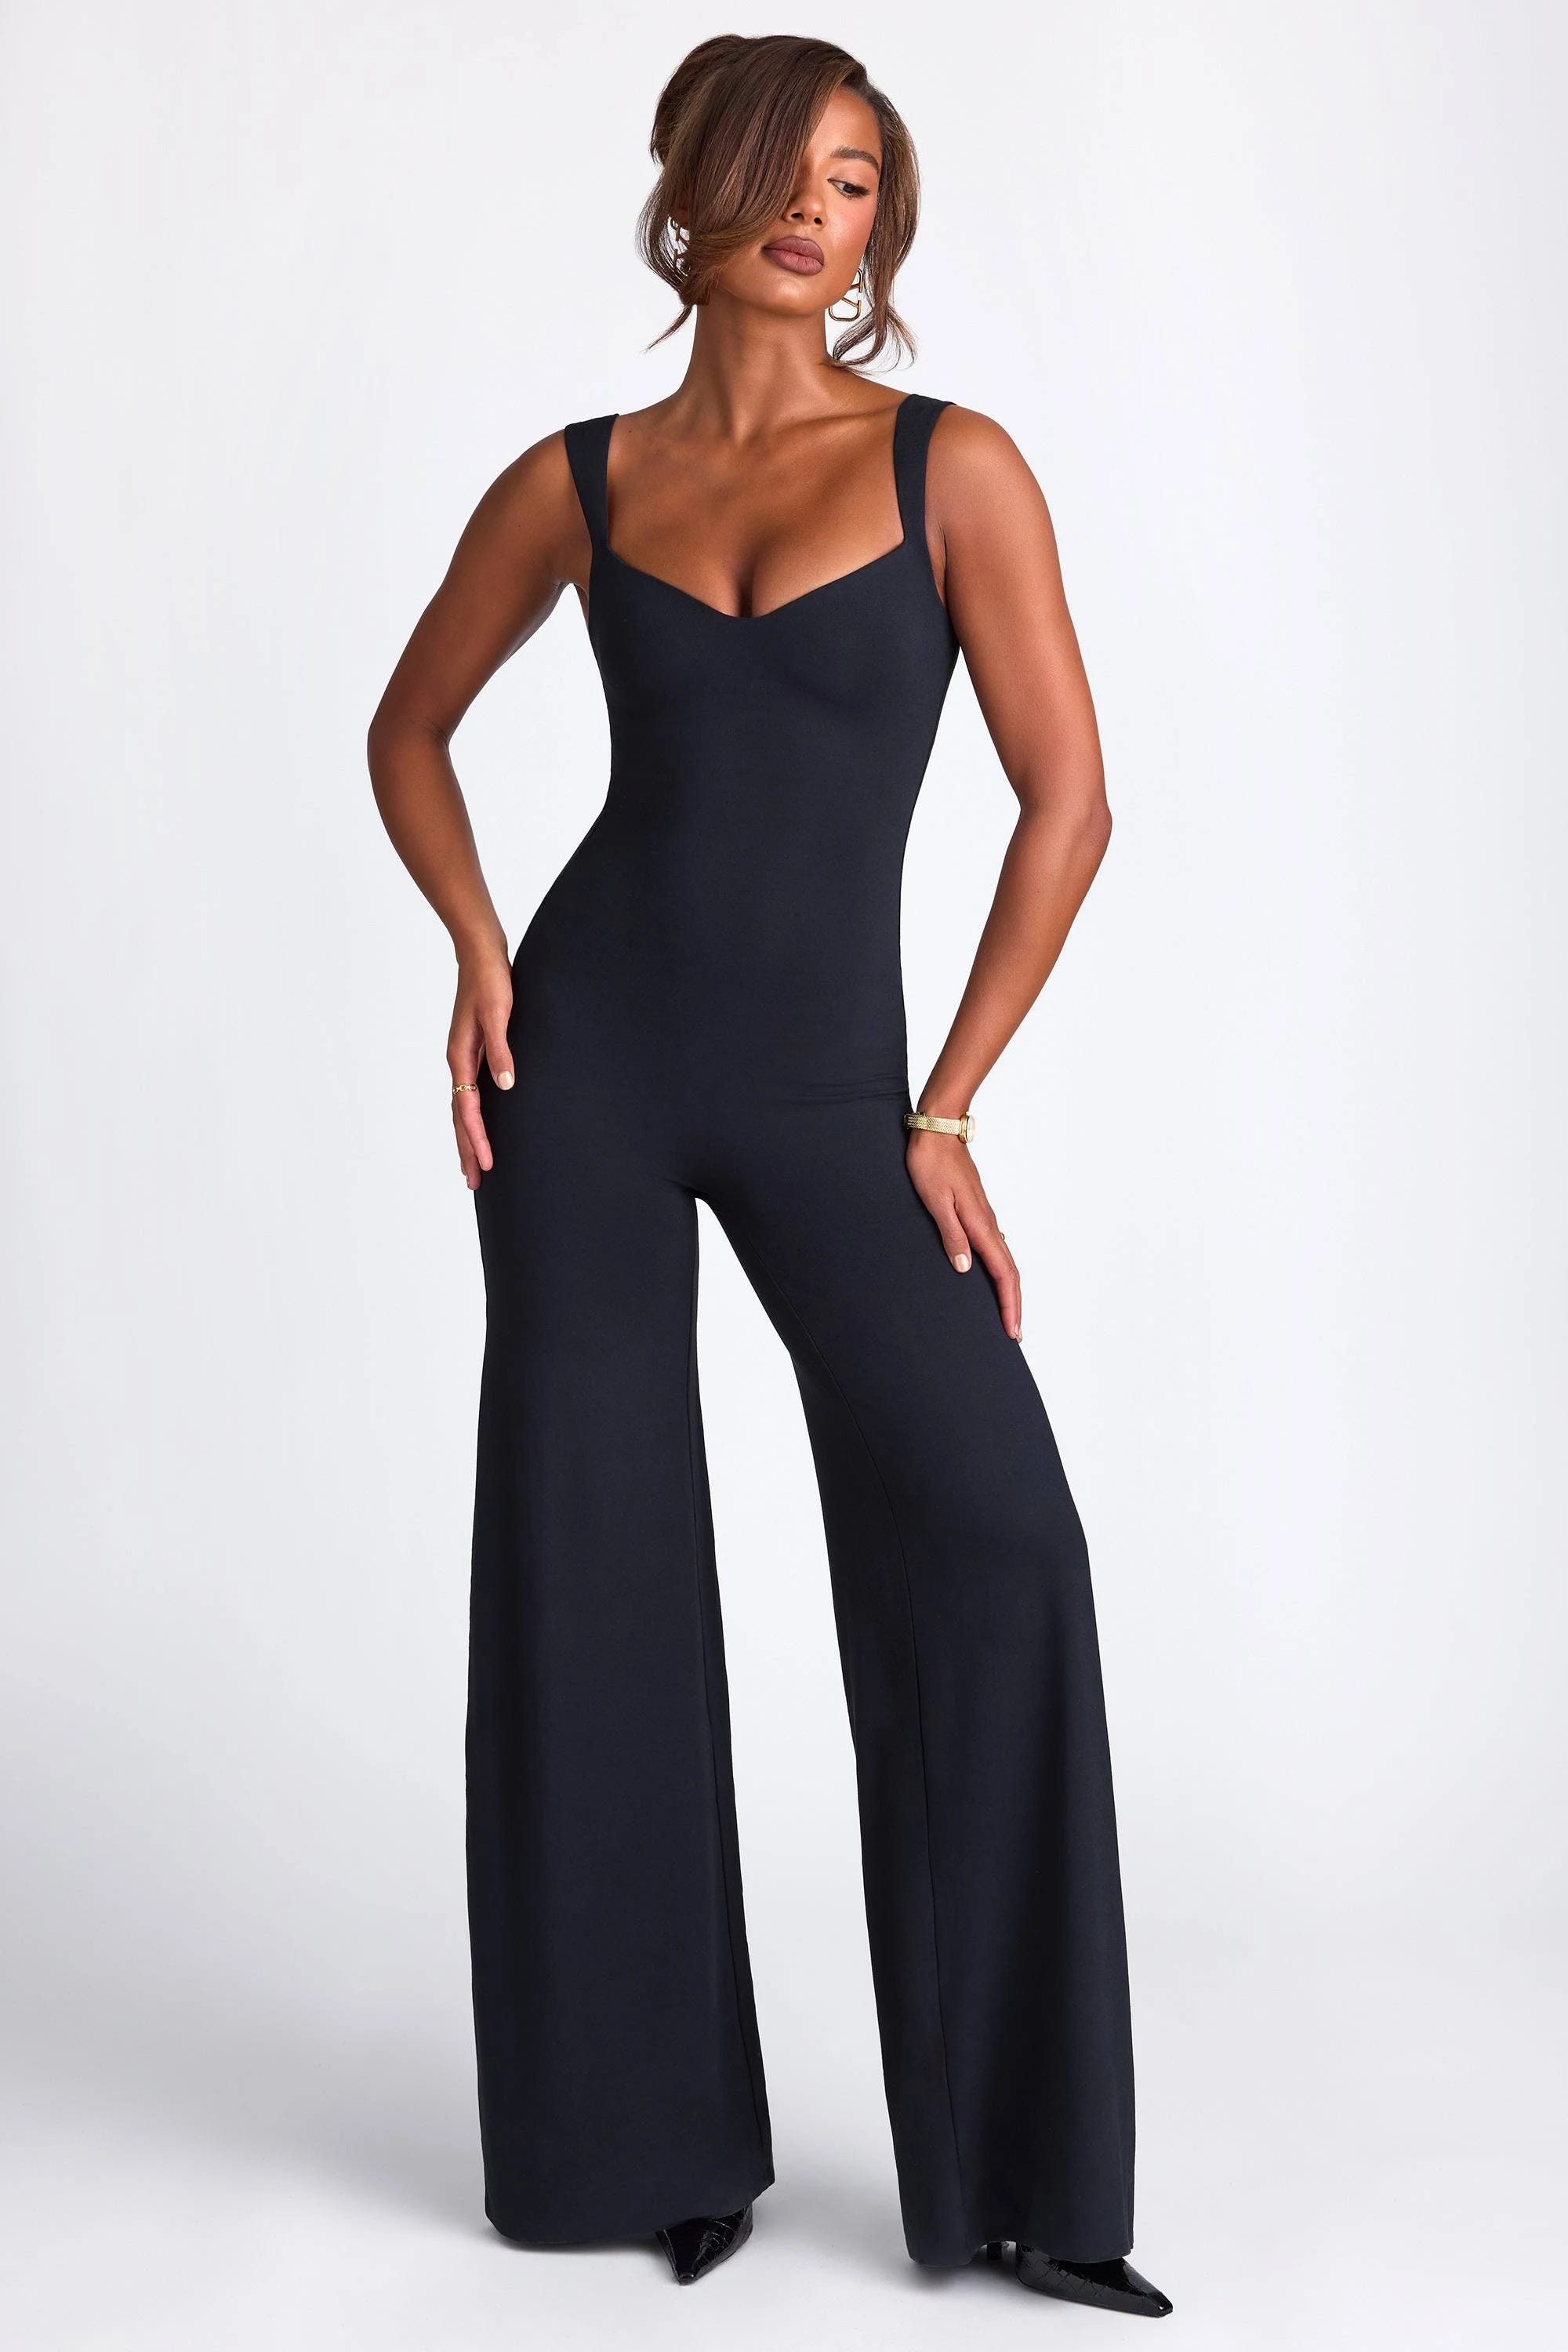 Sustainable Black Jumpsuit with Sweetheart Neckline and Adjustable Straps | Image